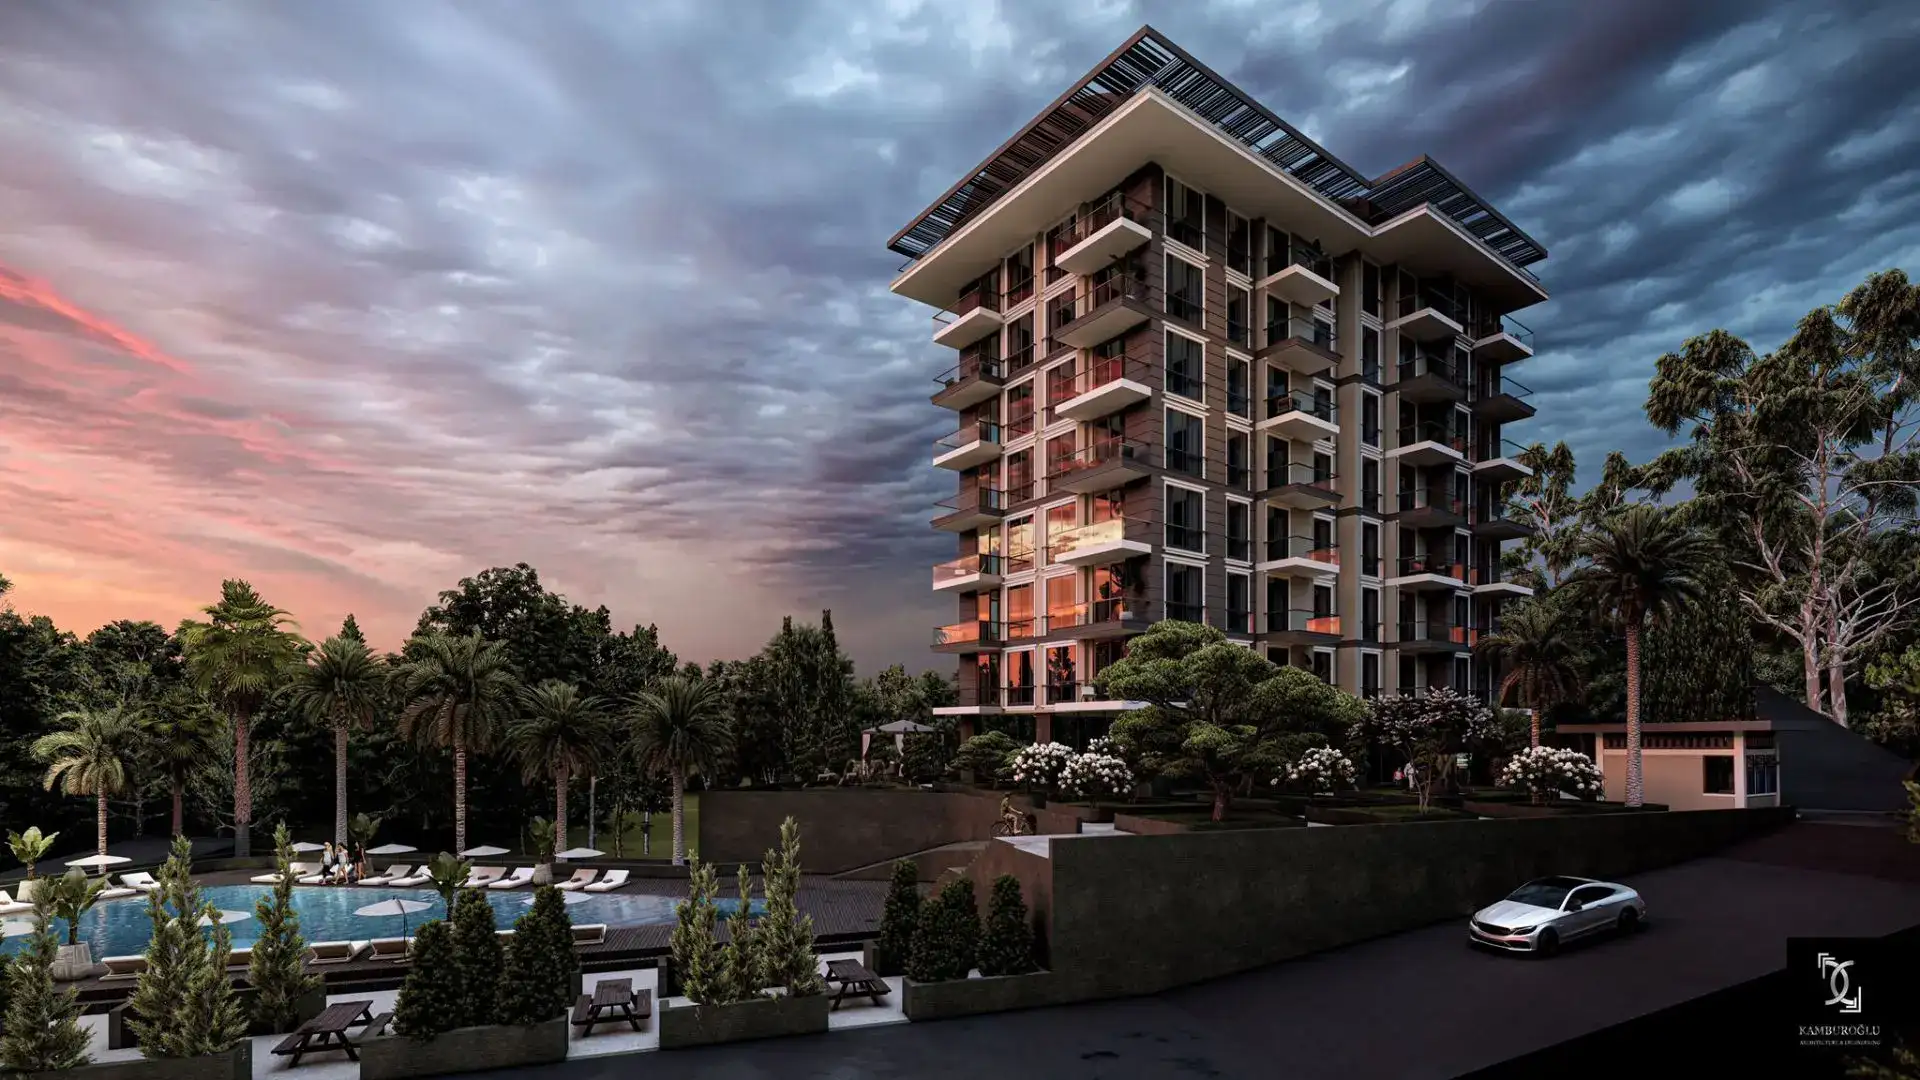 PROJECT OF A MODERN RESIDENTIAL COMPLEX IN ALANYA DEMIRTAS DISTRICT